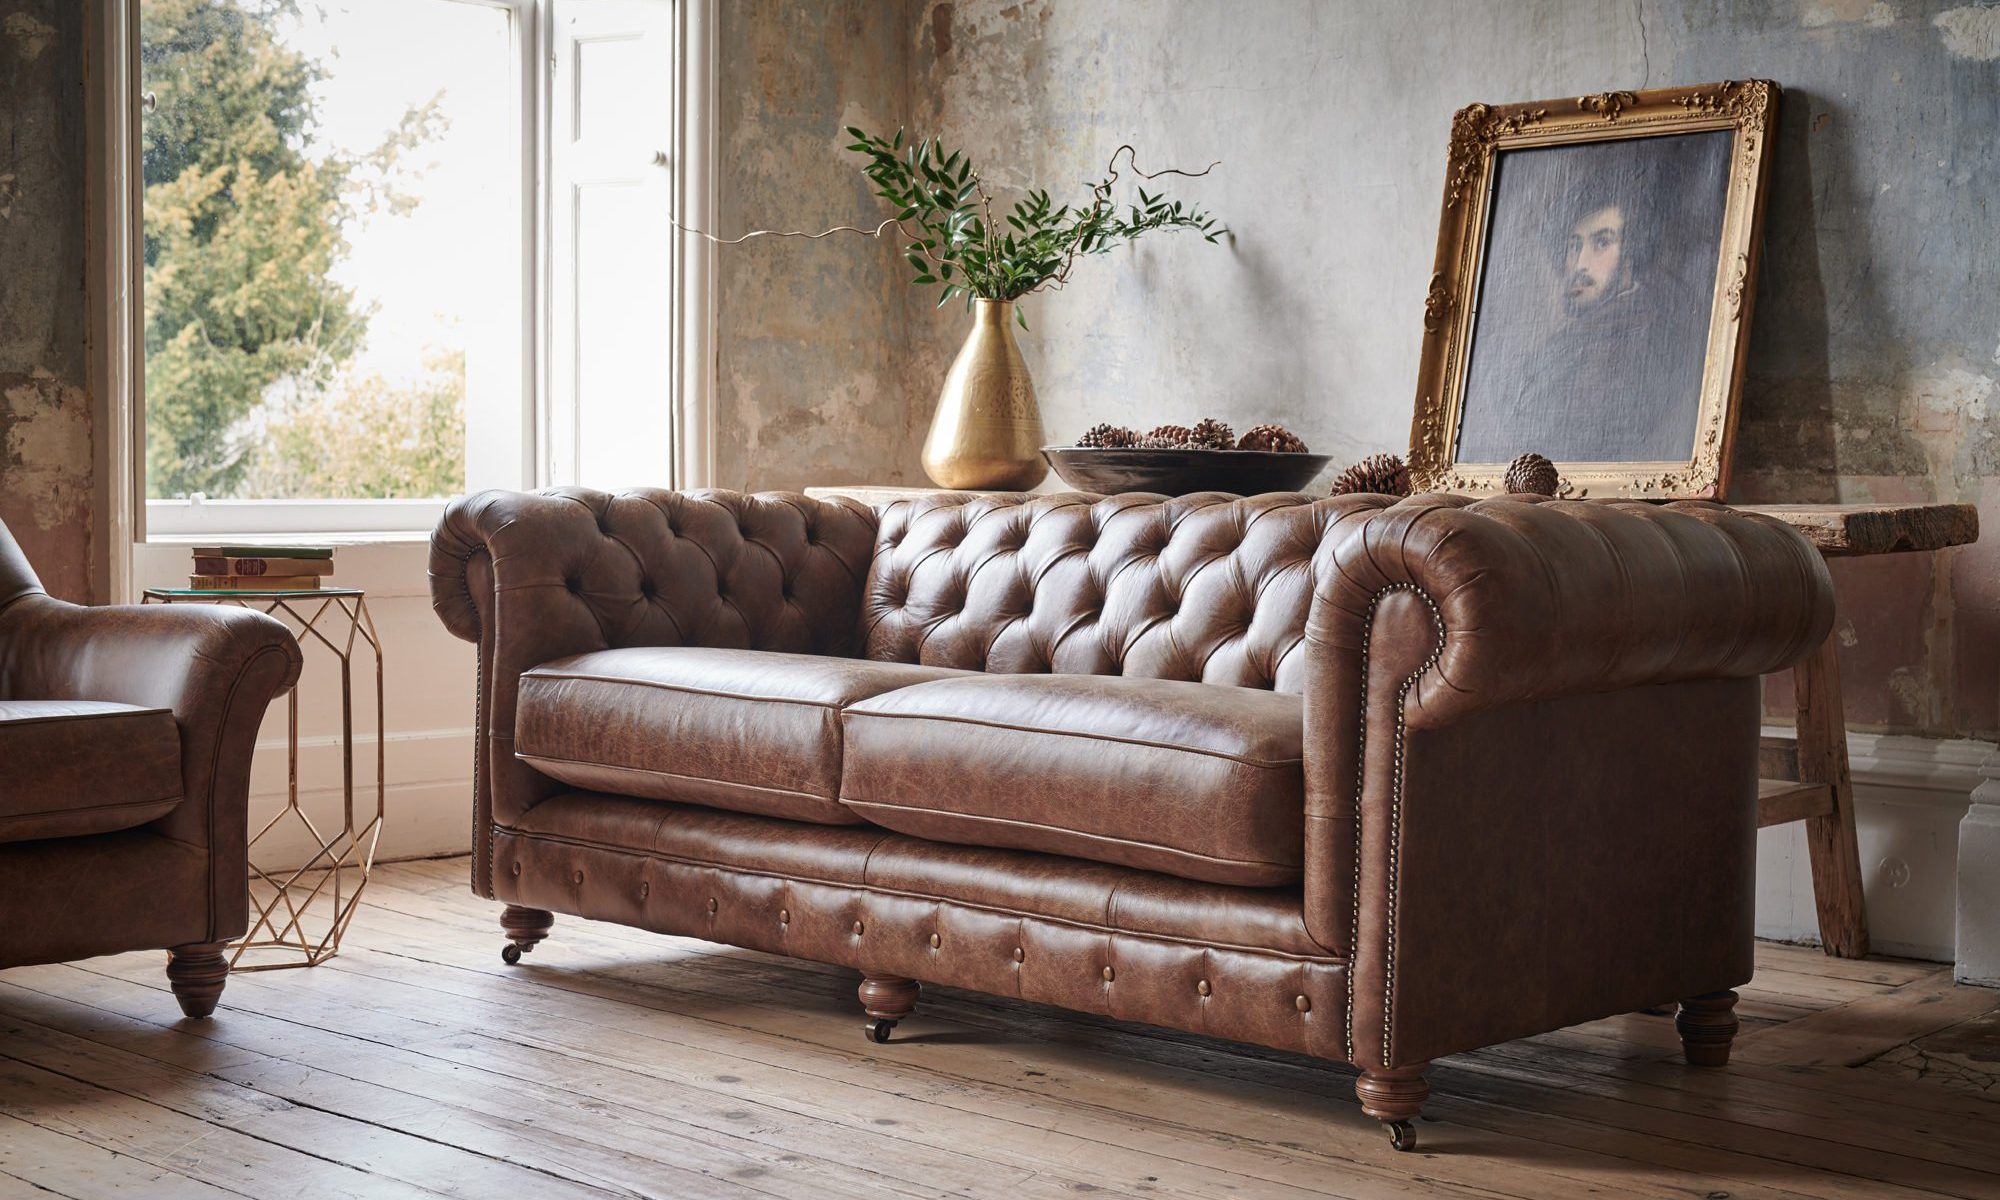 Leather Chesterfield Sofas And Chairs